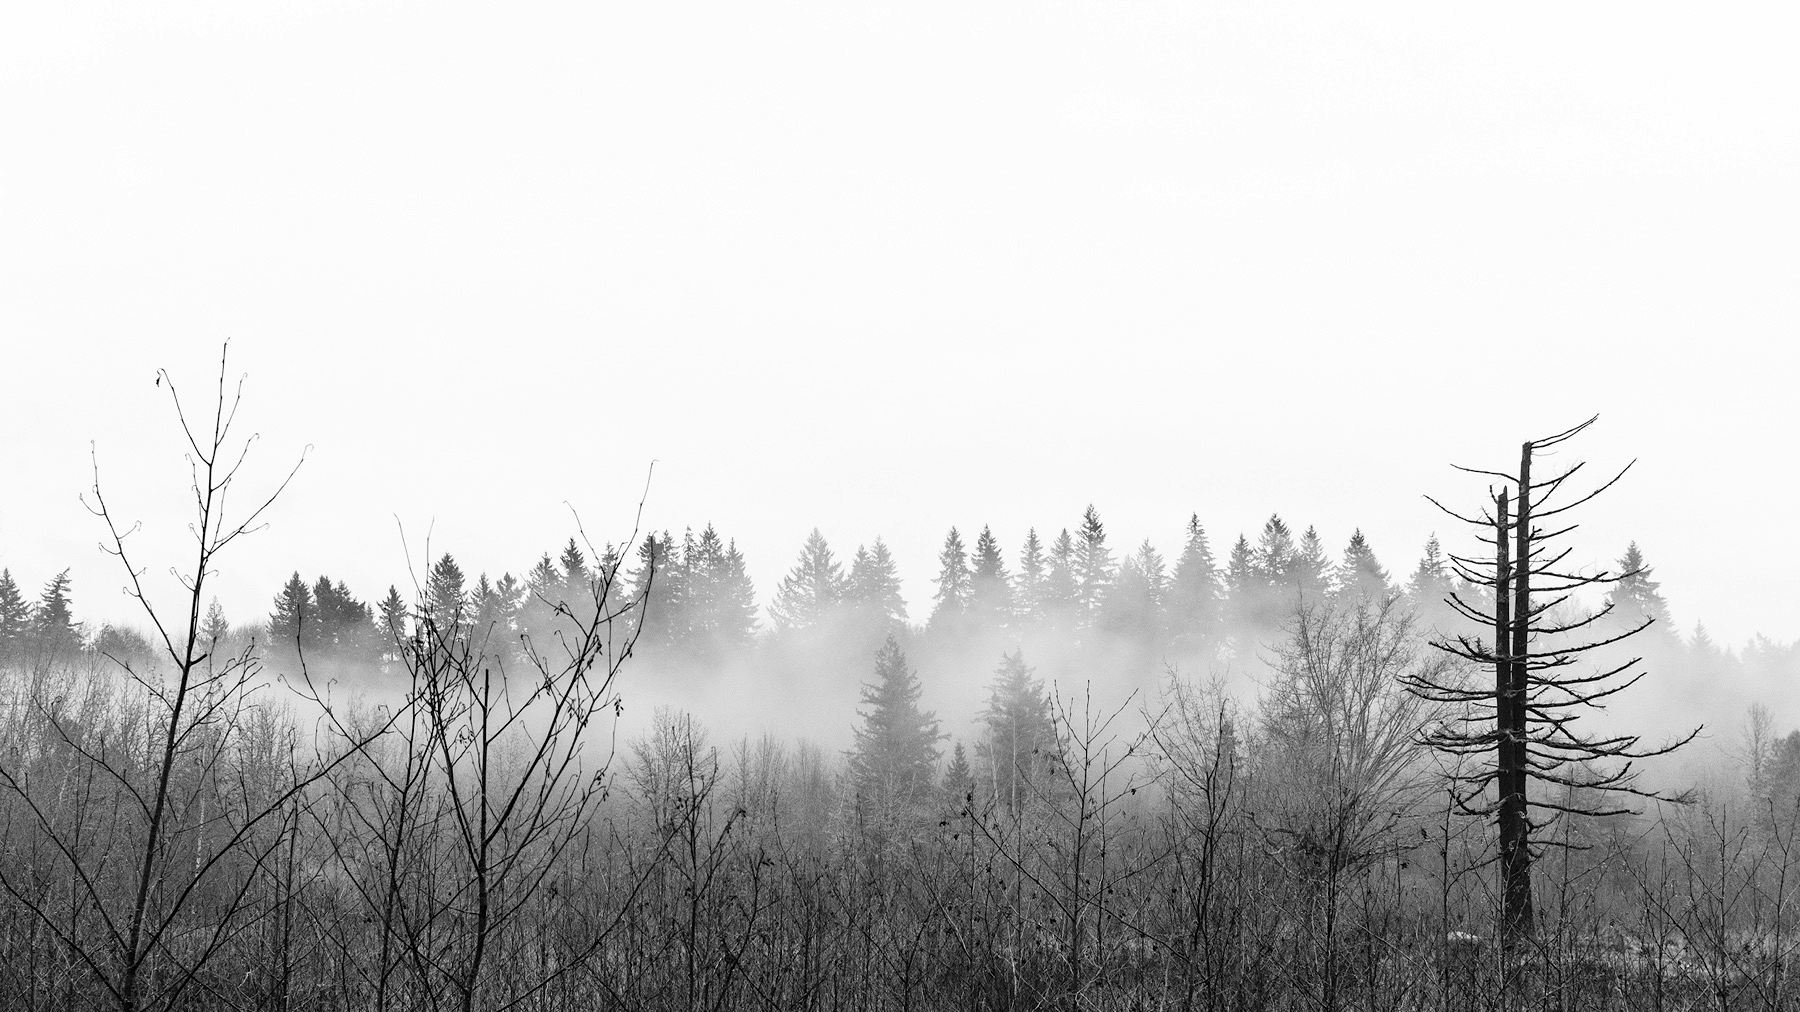 Monochrome. A dead tree against a misty background.